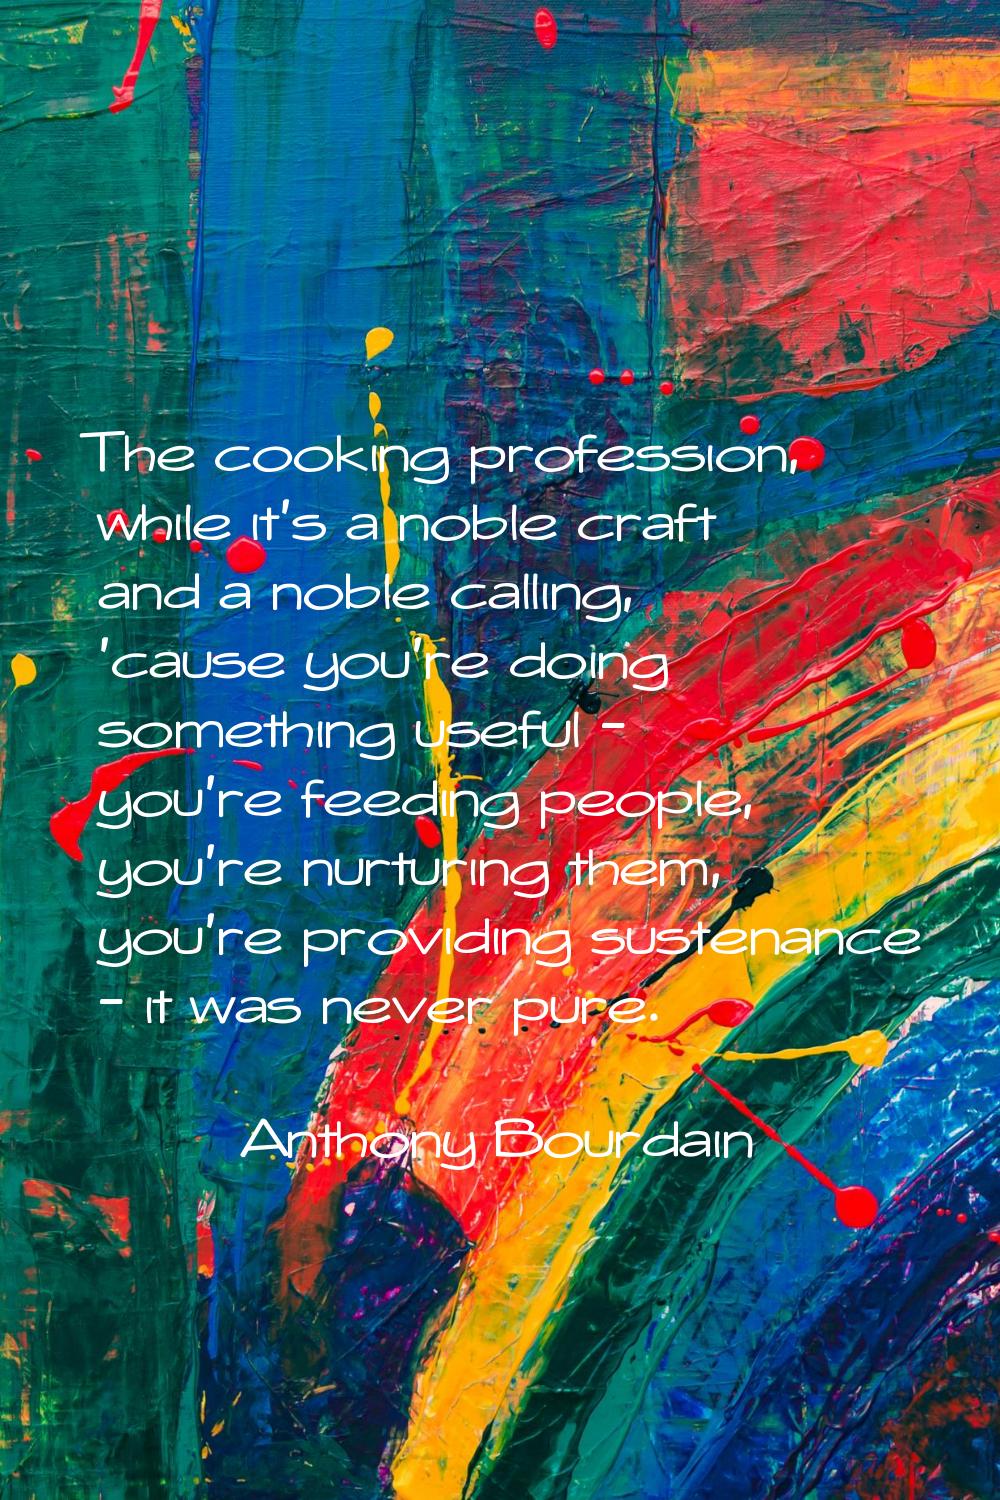 The cooking profession, while it's a noble craft and a noble calling, 'cause you're doing something